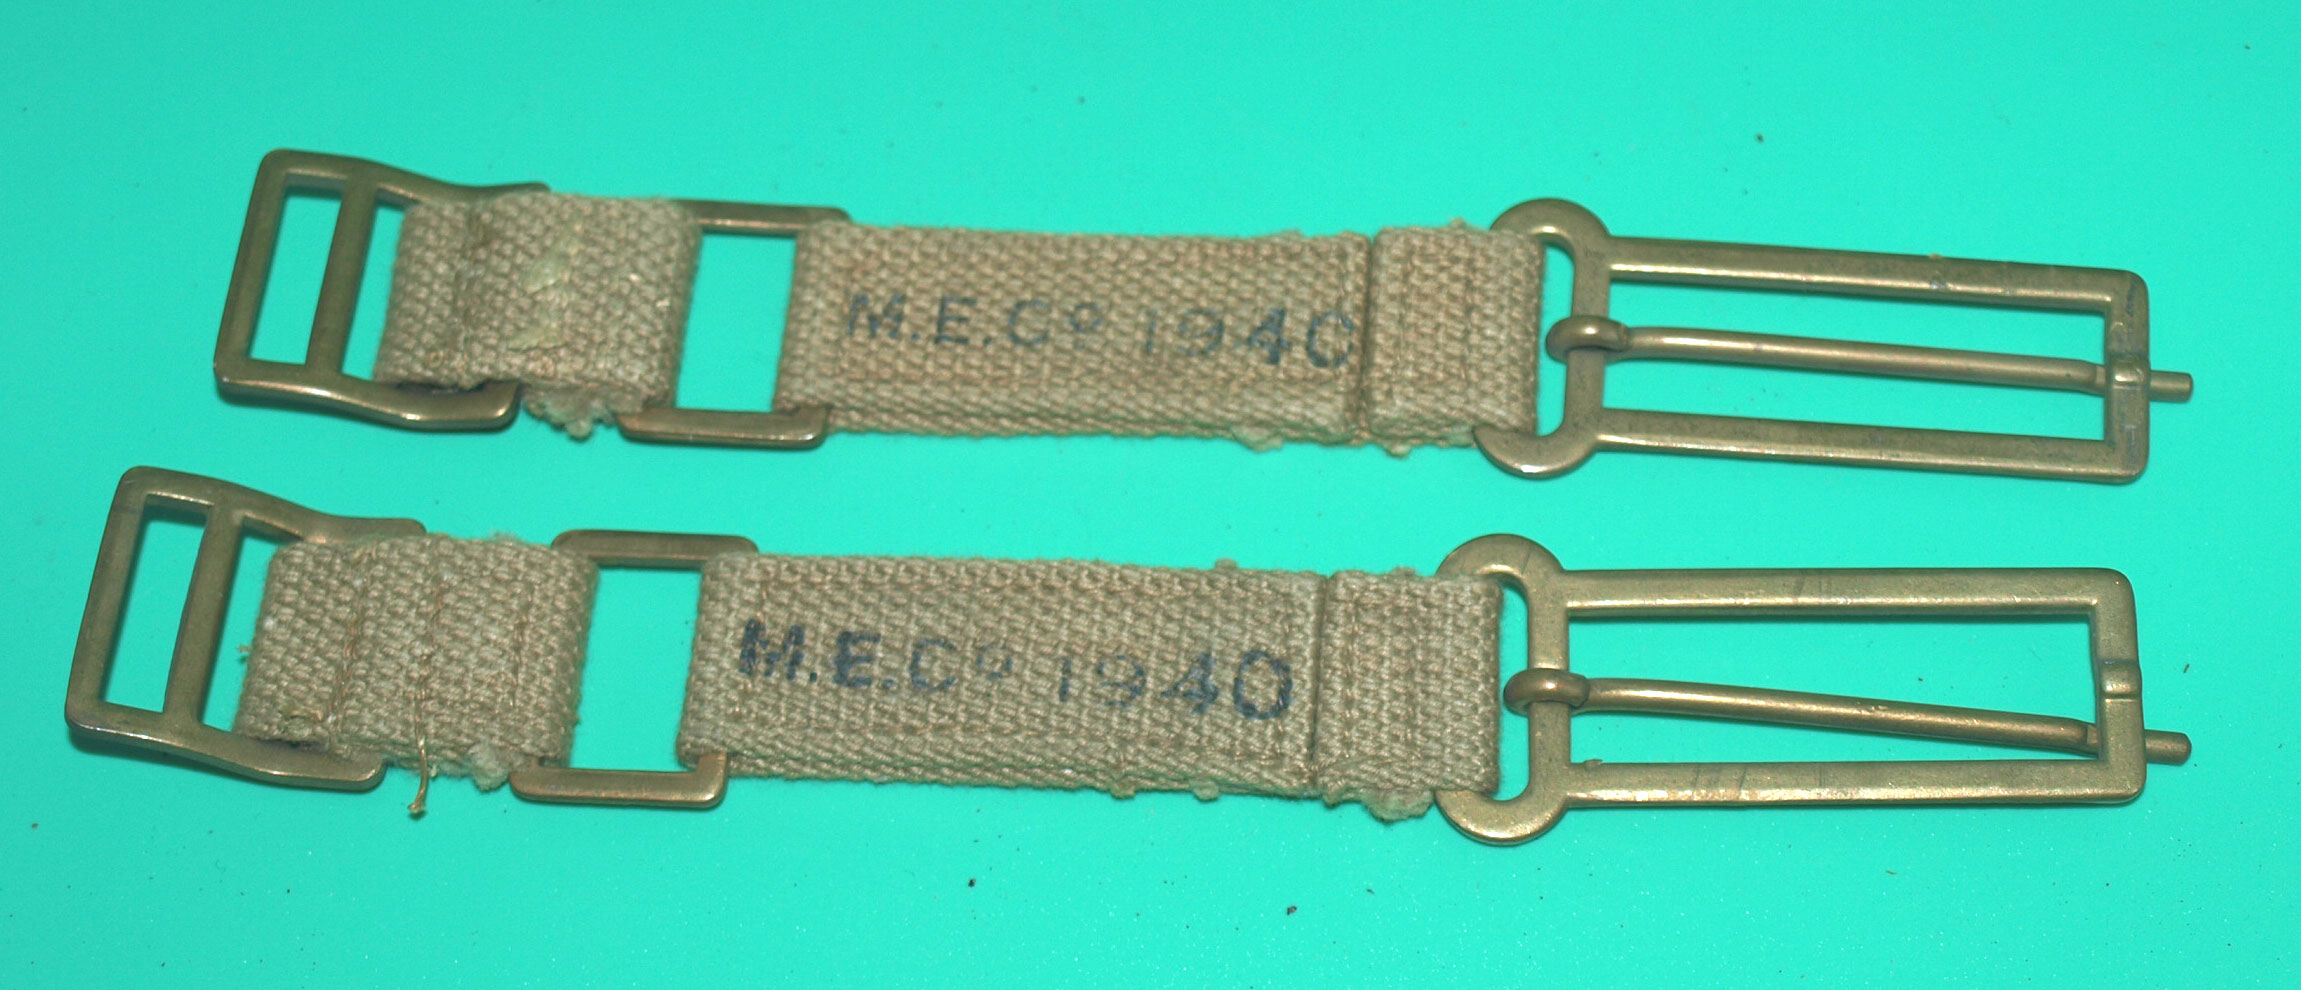 37 Pattern pair of Brace Attachments dated 1940, mint condition £30